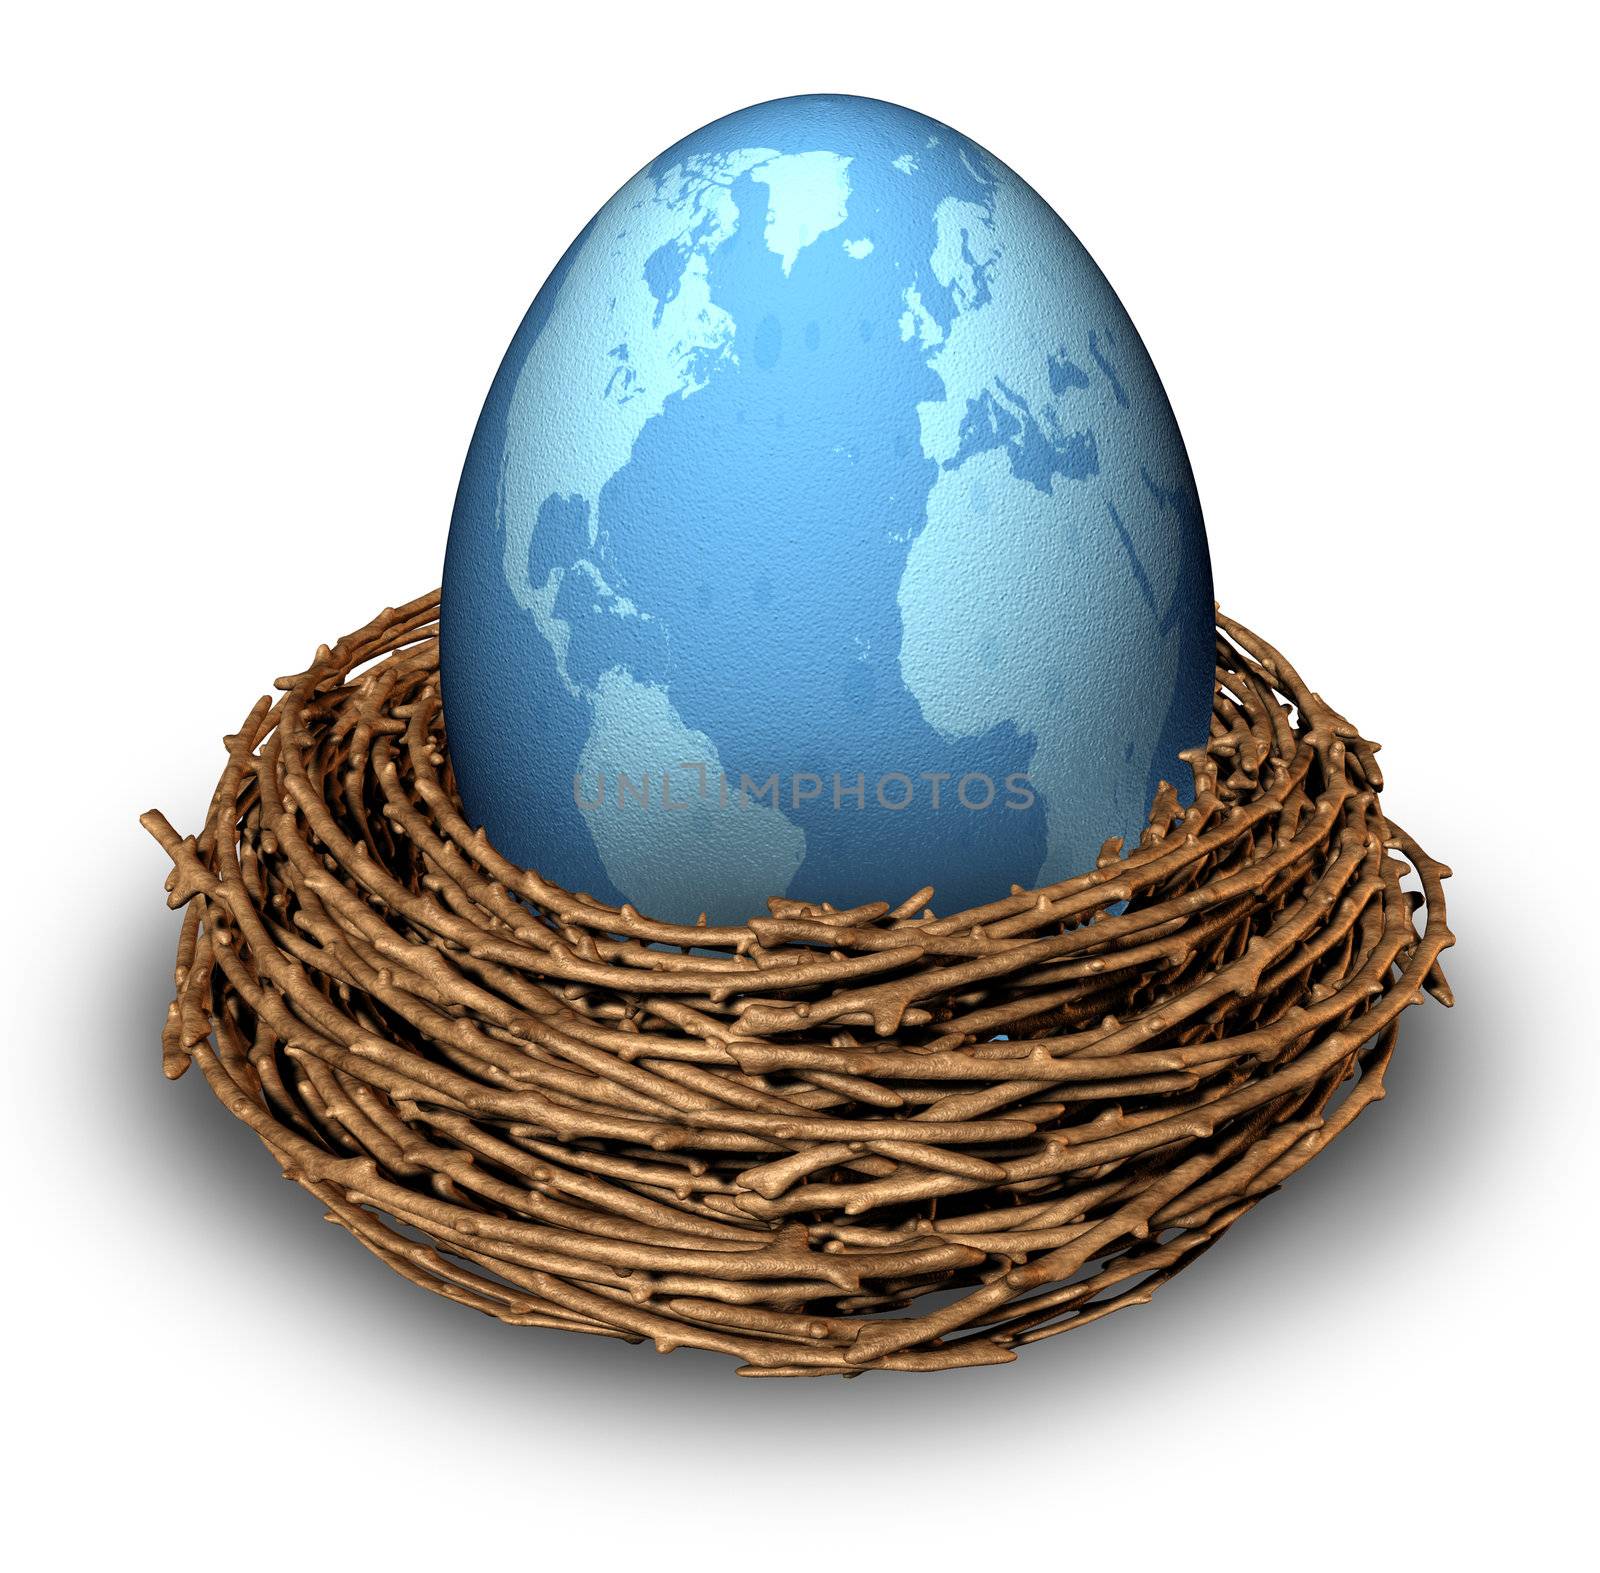 International investments and global finance business symbol with a blue egg with the map of the world in a nest as a concept of savings and money management in many countries as China Russia Europe and the United States.